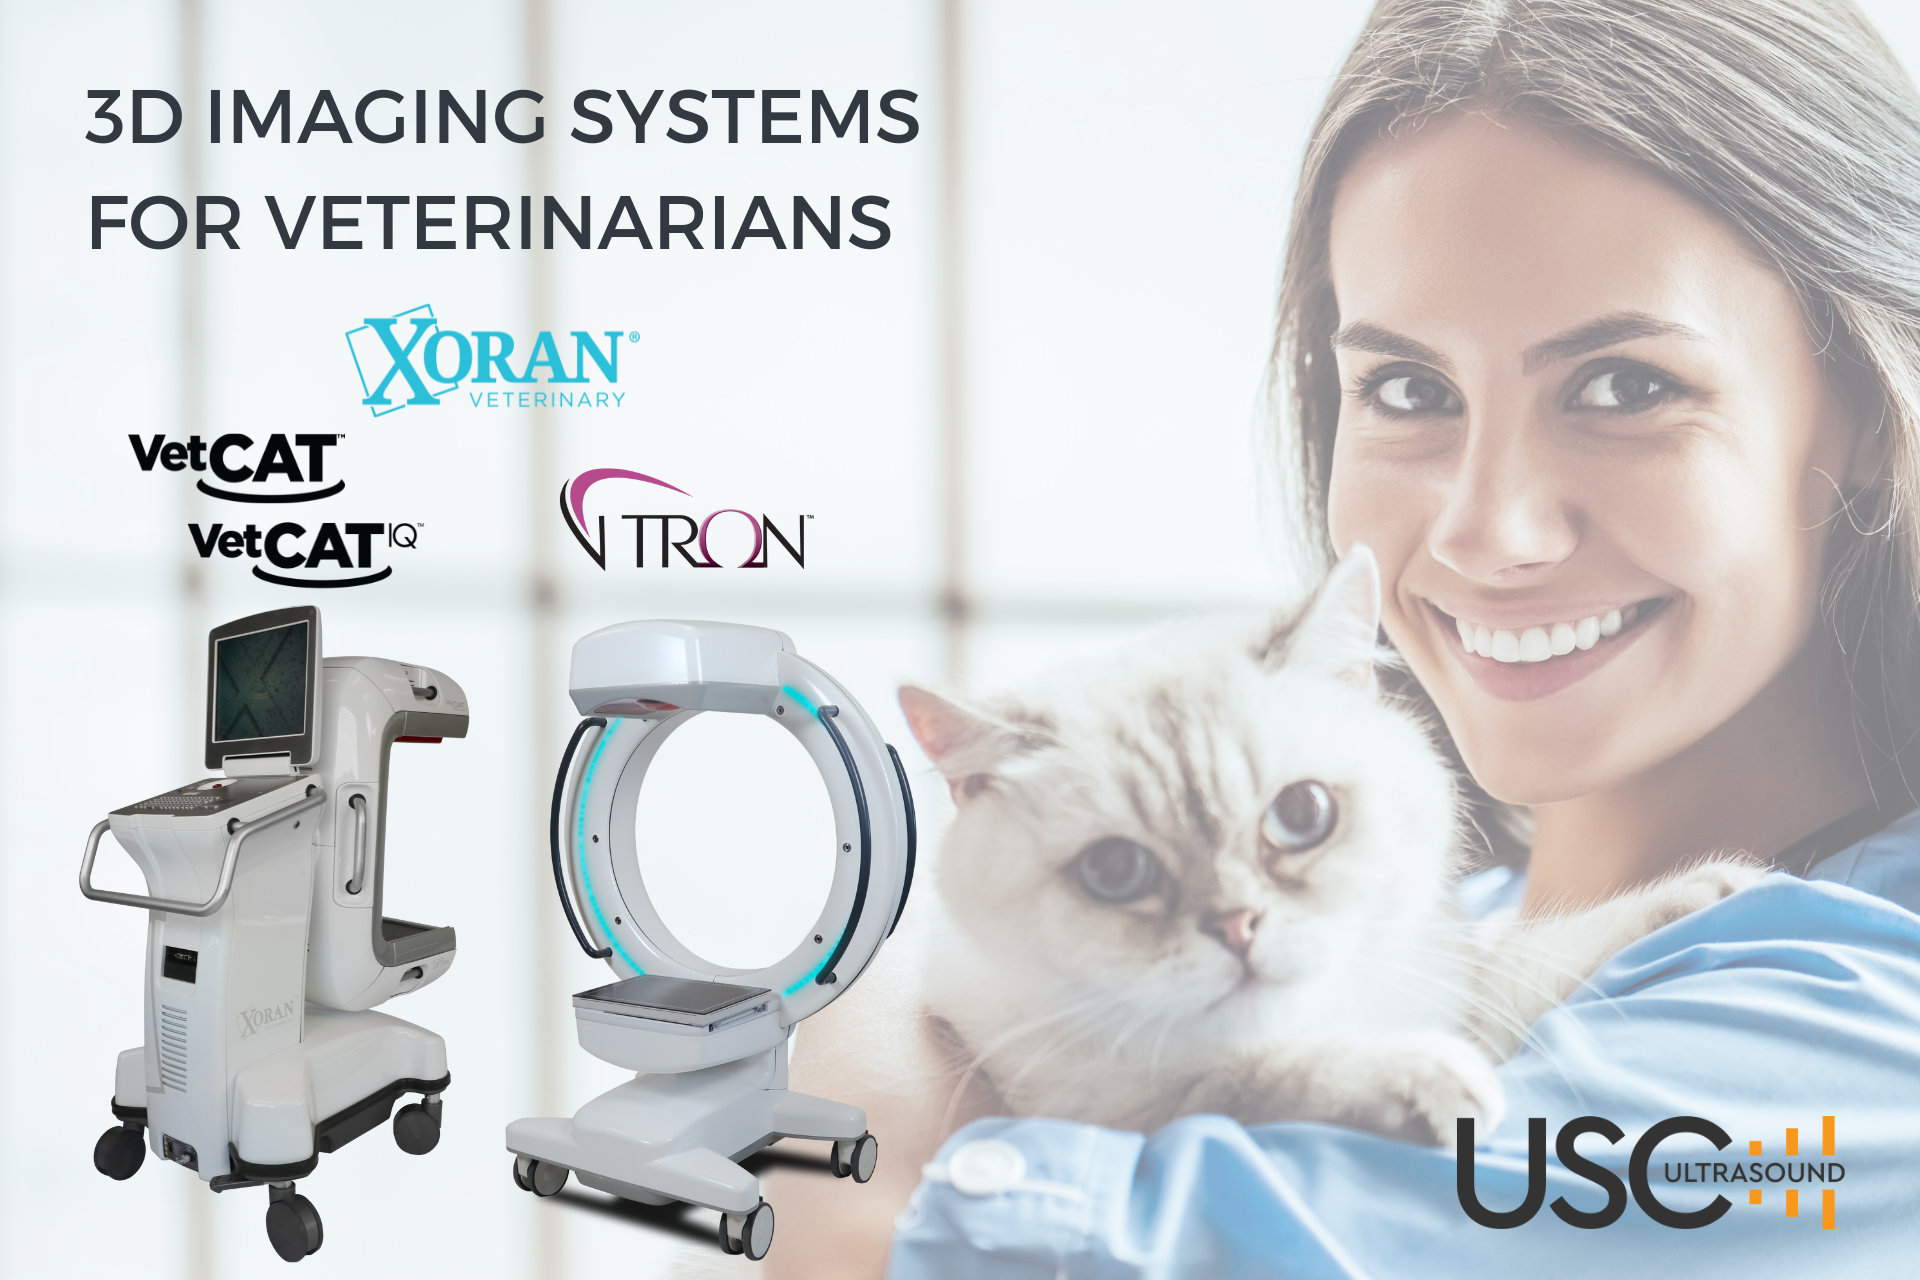 3D Imaging Systems for Veterinarians